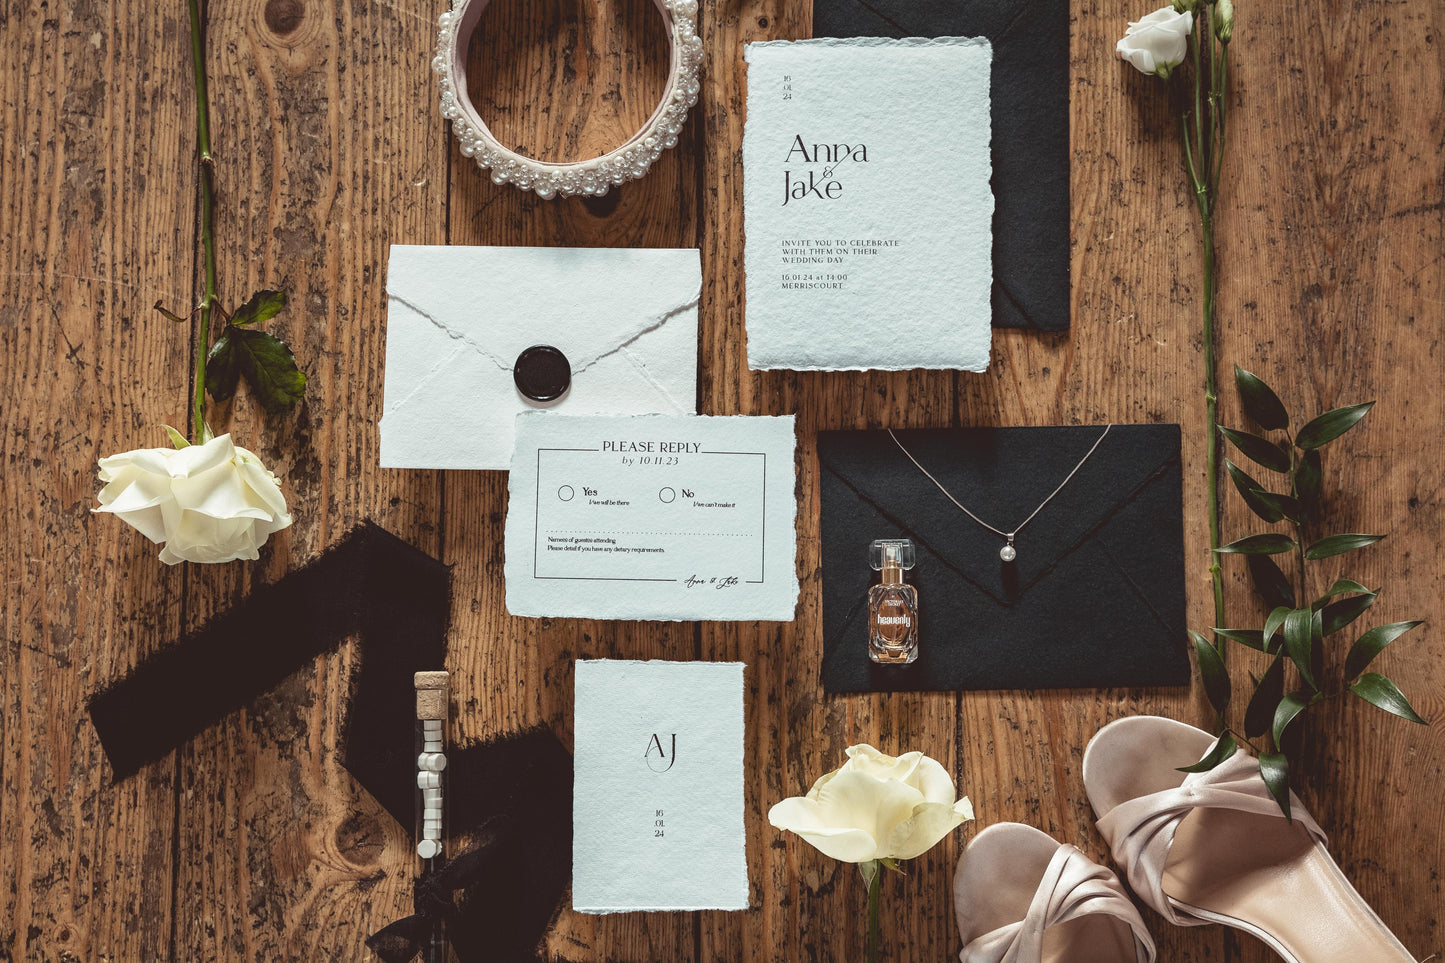 Hand crafted Monochrome Stationery Suite